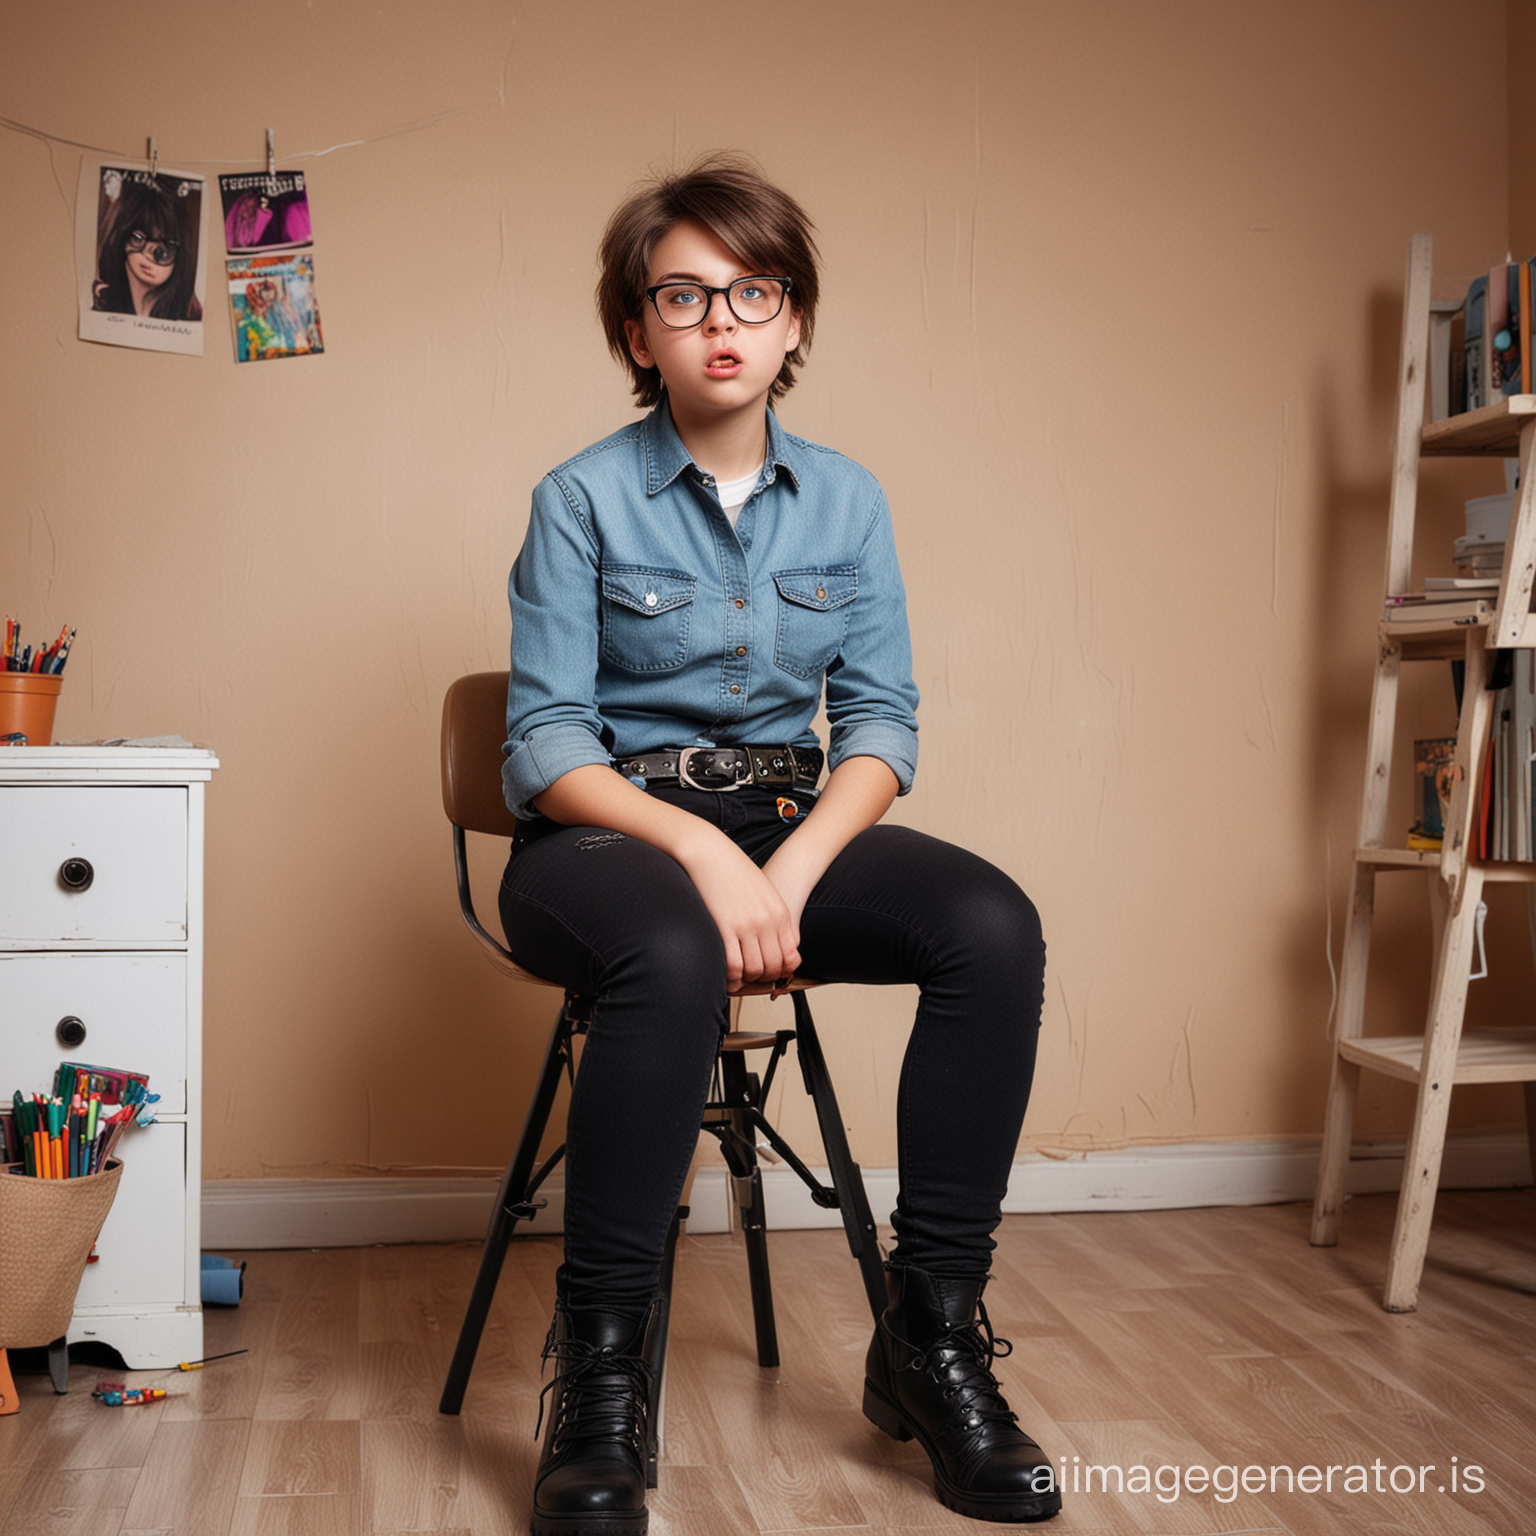 photo of a curvy ugly girl,14 years old,short hair,glasses,very skinny black tight jeans with belt,angry face,sitting on a chair in a messy children's room